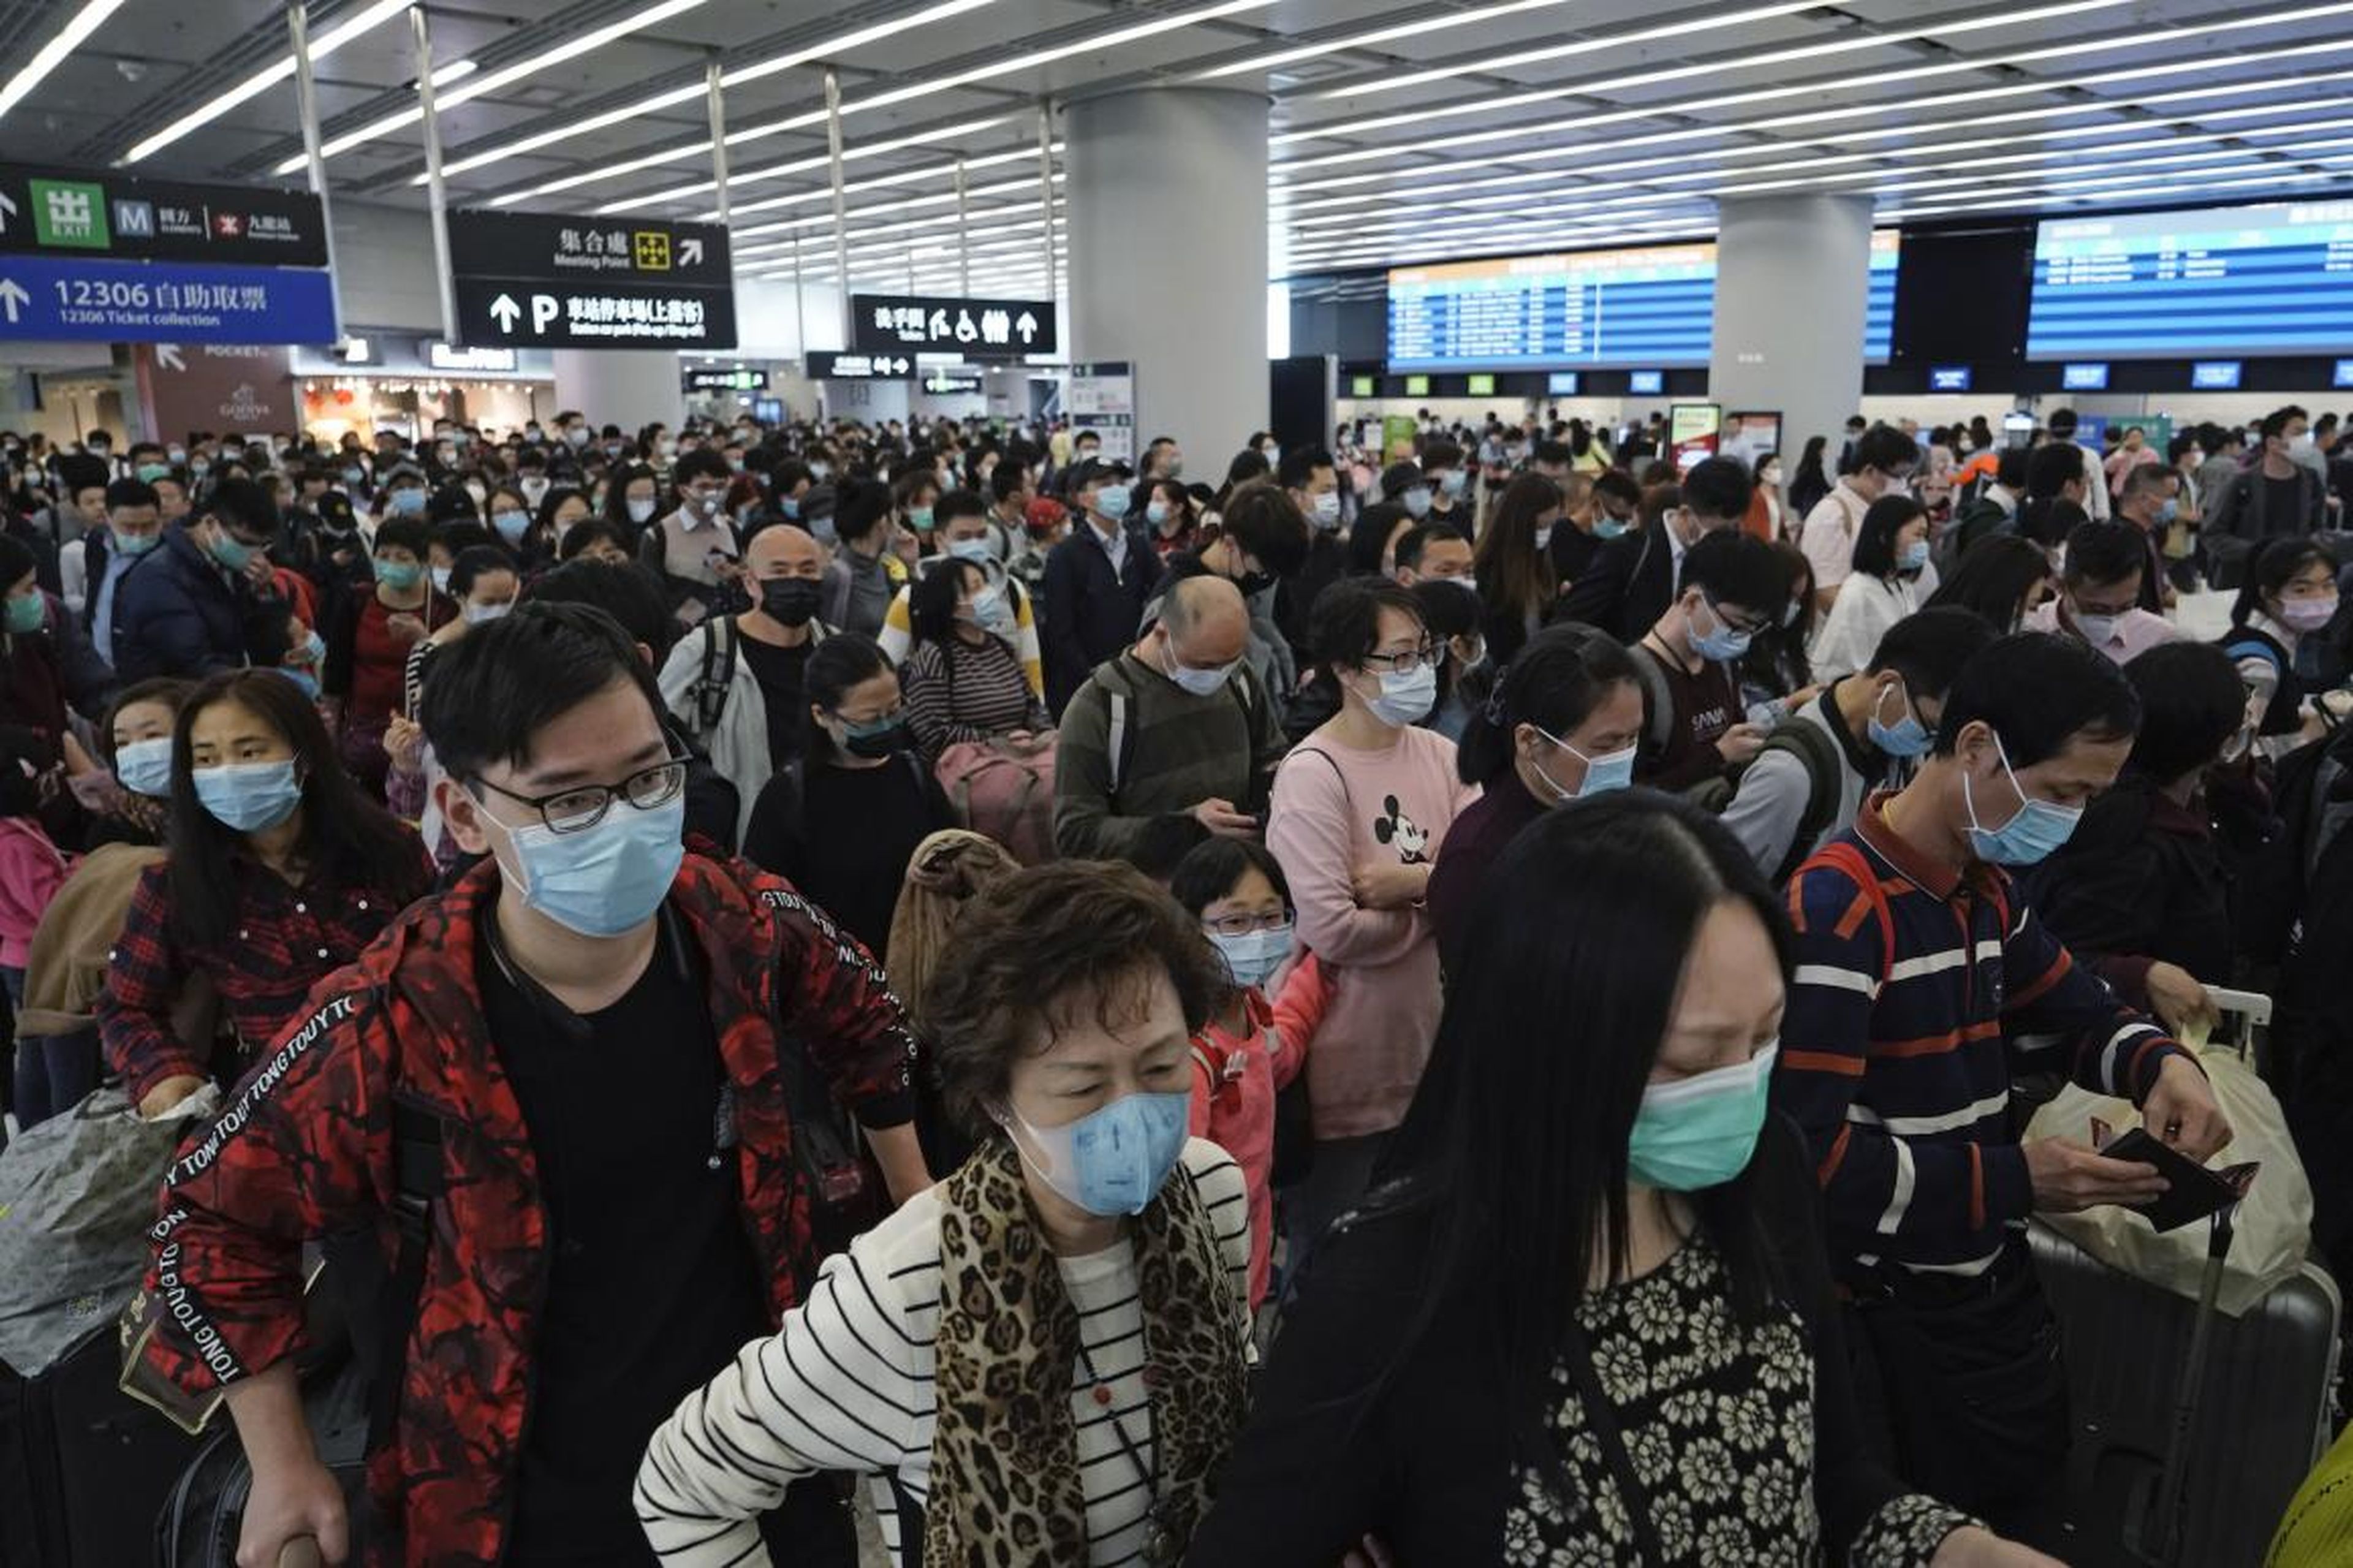 Passengers wear protective face masks at the departure hall of the high-speed train station in Hong Kong, January 23, 2020.